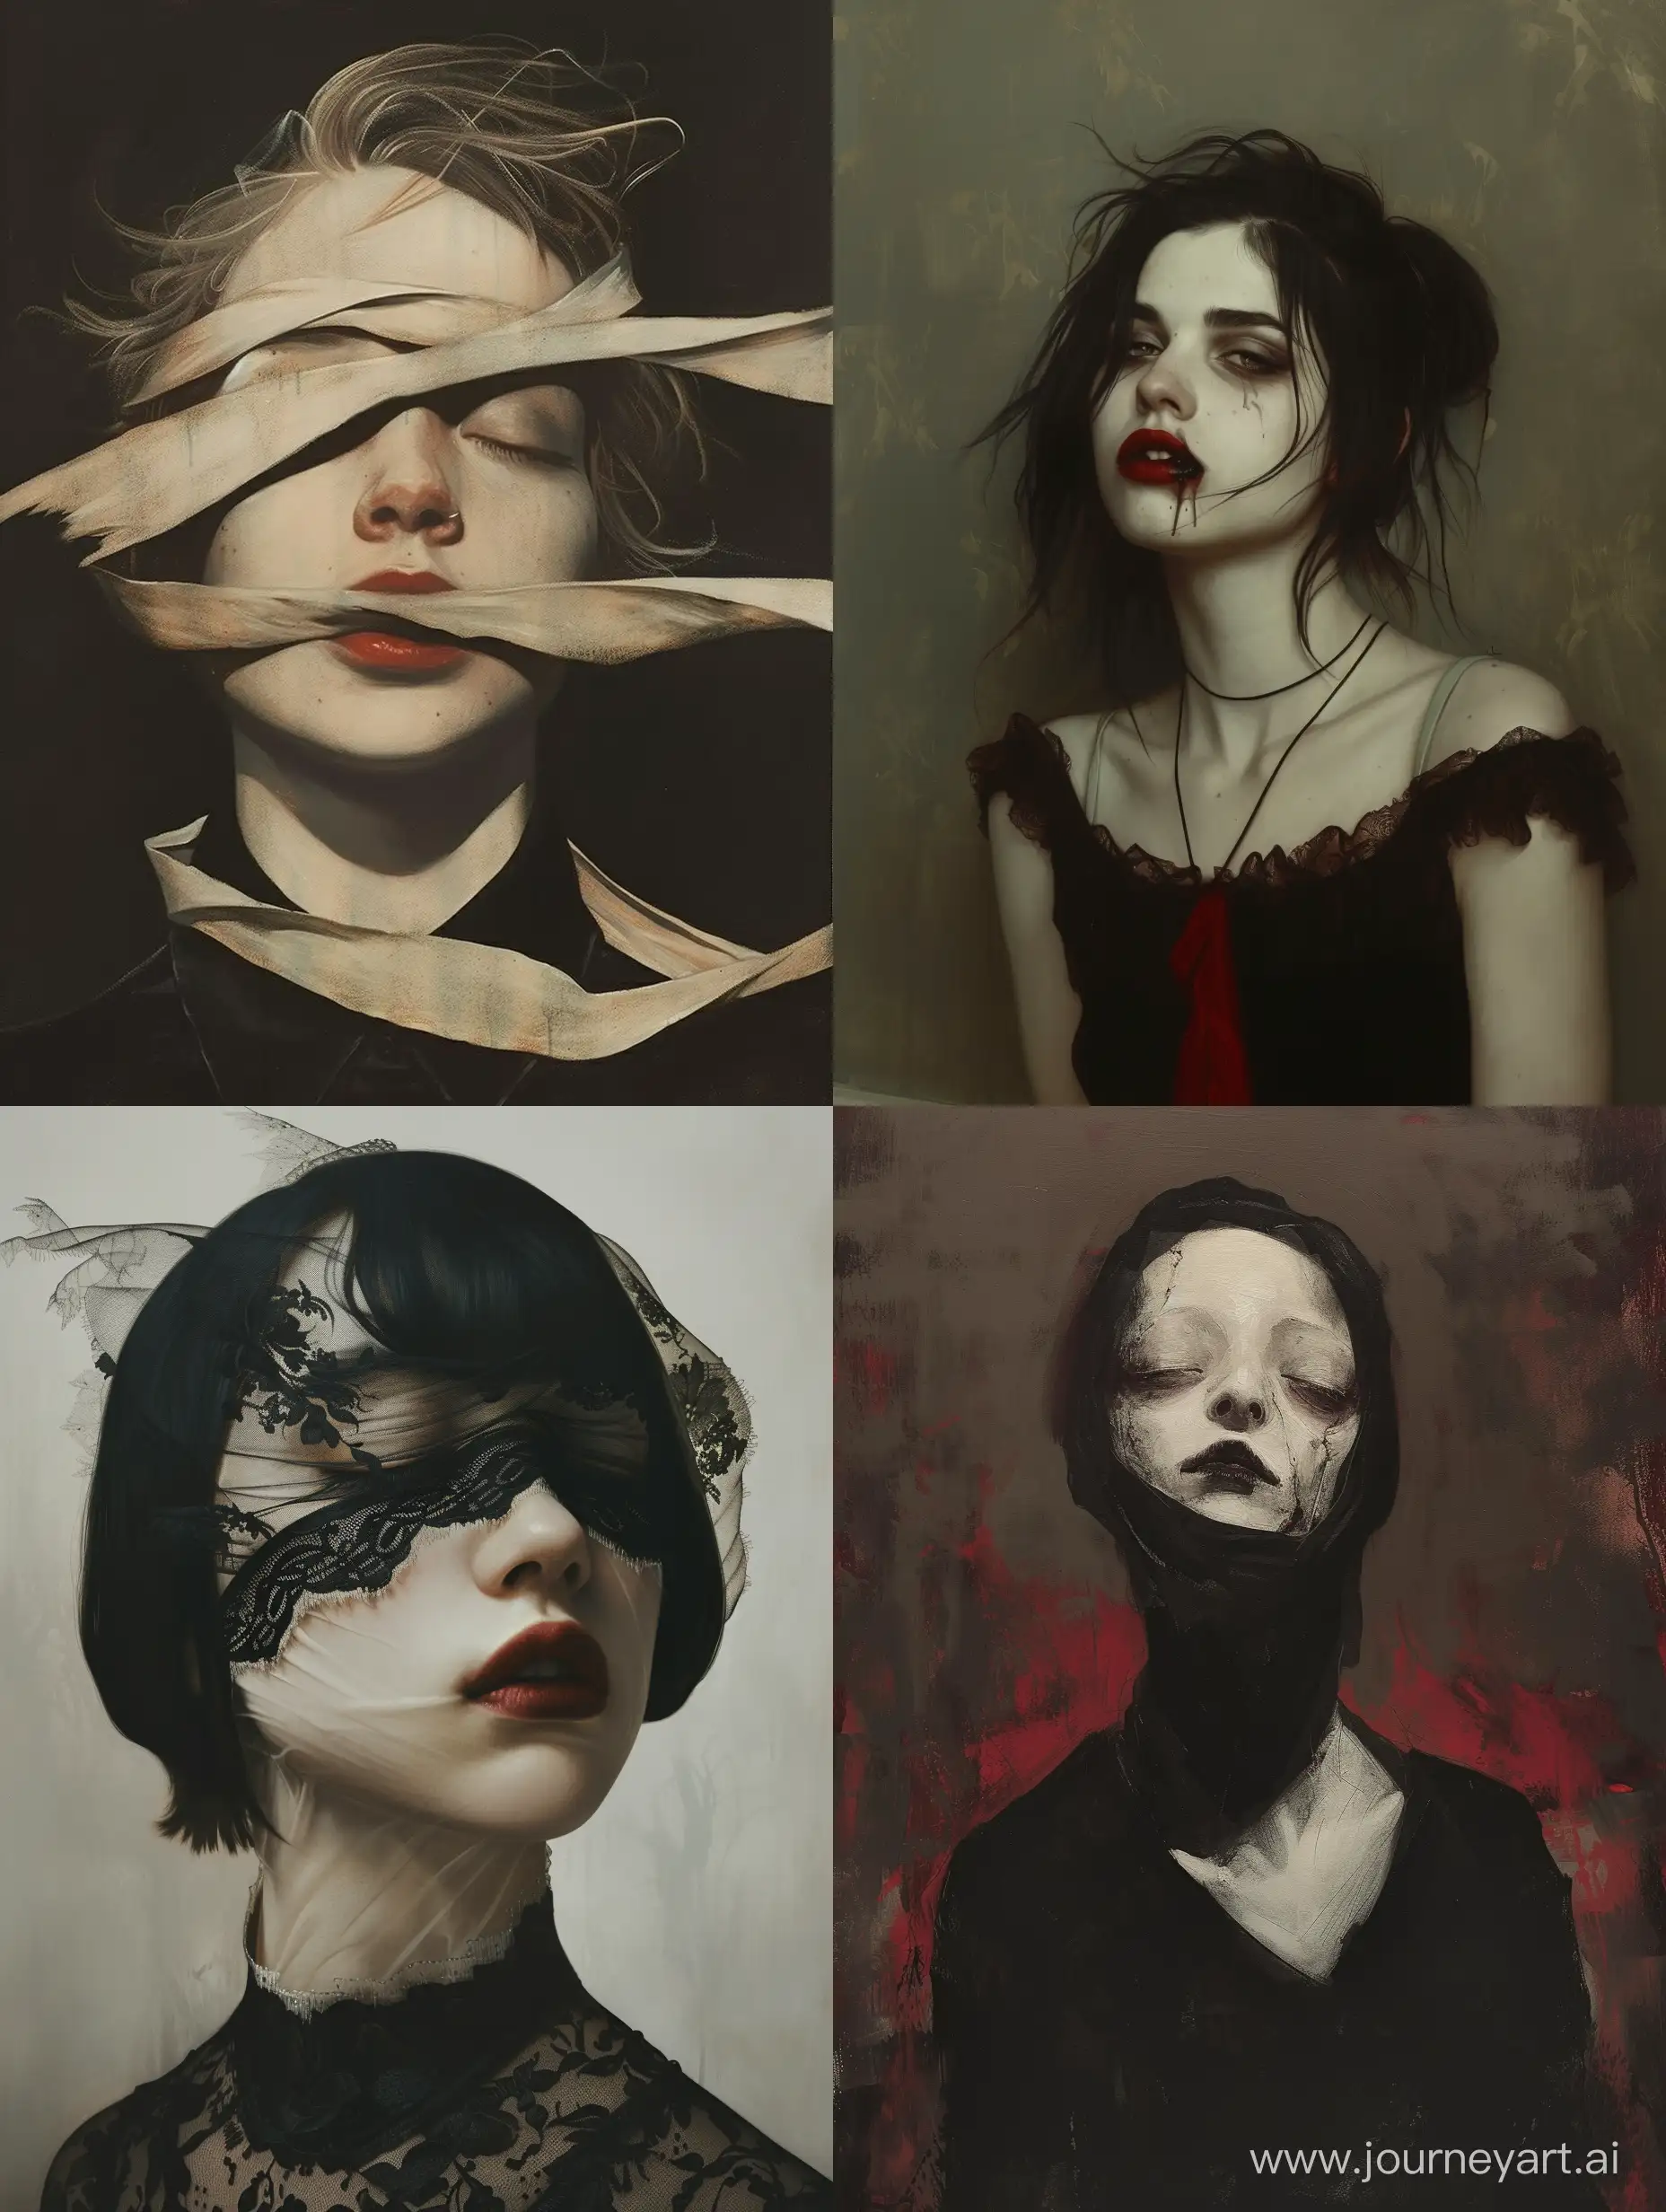 There is ugliness in beauty, but there is also beauty in ugliness. in the style of adrian ghenie, esao andrews, jenny saville, edward hopper, surrealism, dark art by james jean, takato yamamoto, inkpunk minimalism